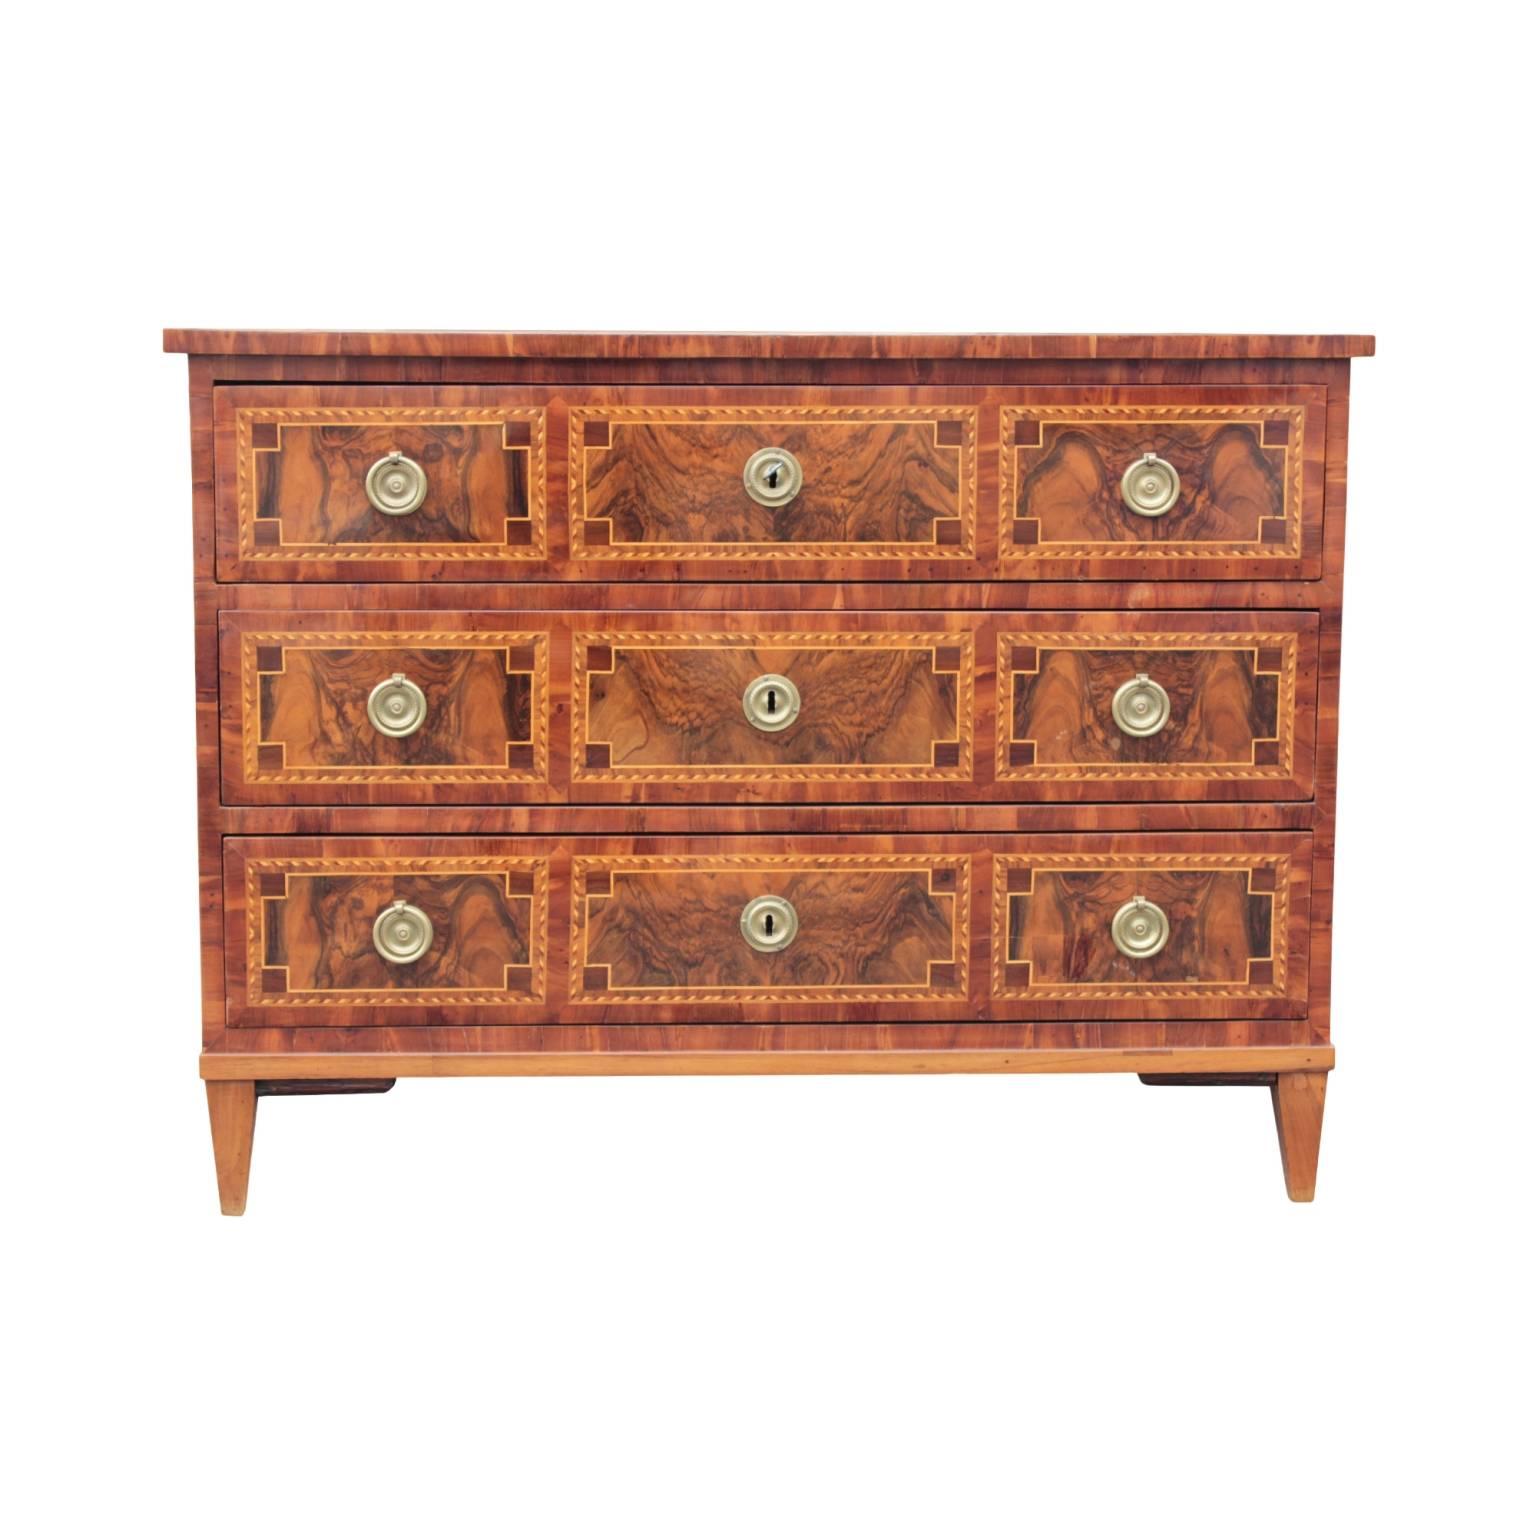 South German or Austrian neoclassical chest of drawers of superior quality from Josephinism period (Louis XVI). Top with magnificent parquetry and inlay banding; corpus with three drawers decorated with banding and fillet inlays, bookmatched;